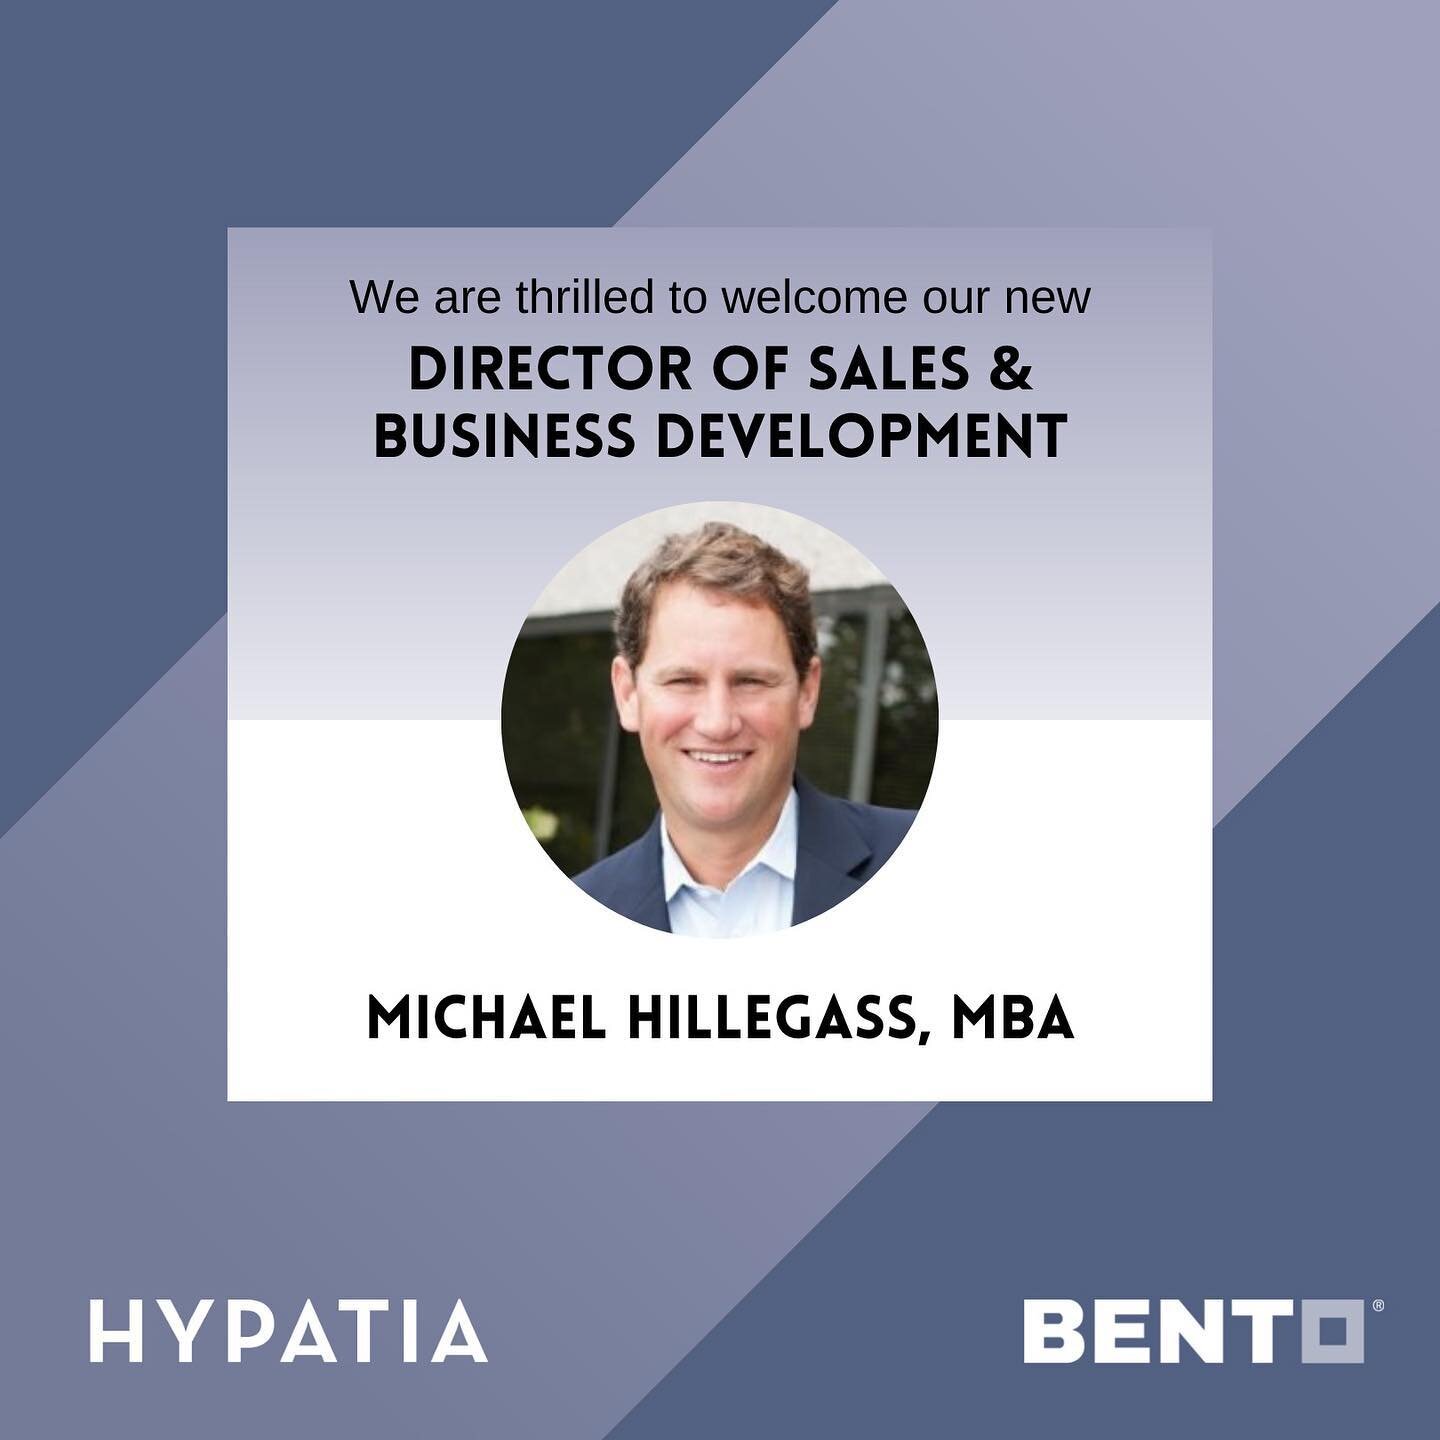 We are excited to announce the addition of Michael Hillegass, MBA to our leadership team as Director of Sales &amp; Business Development!

In this role, Hillegass will oversee all sales and business development efforts for both public and commercial 